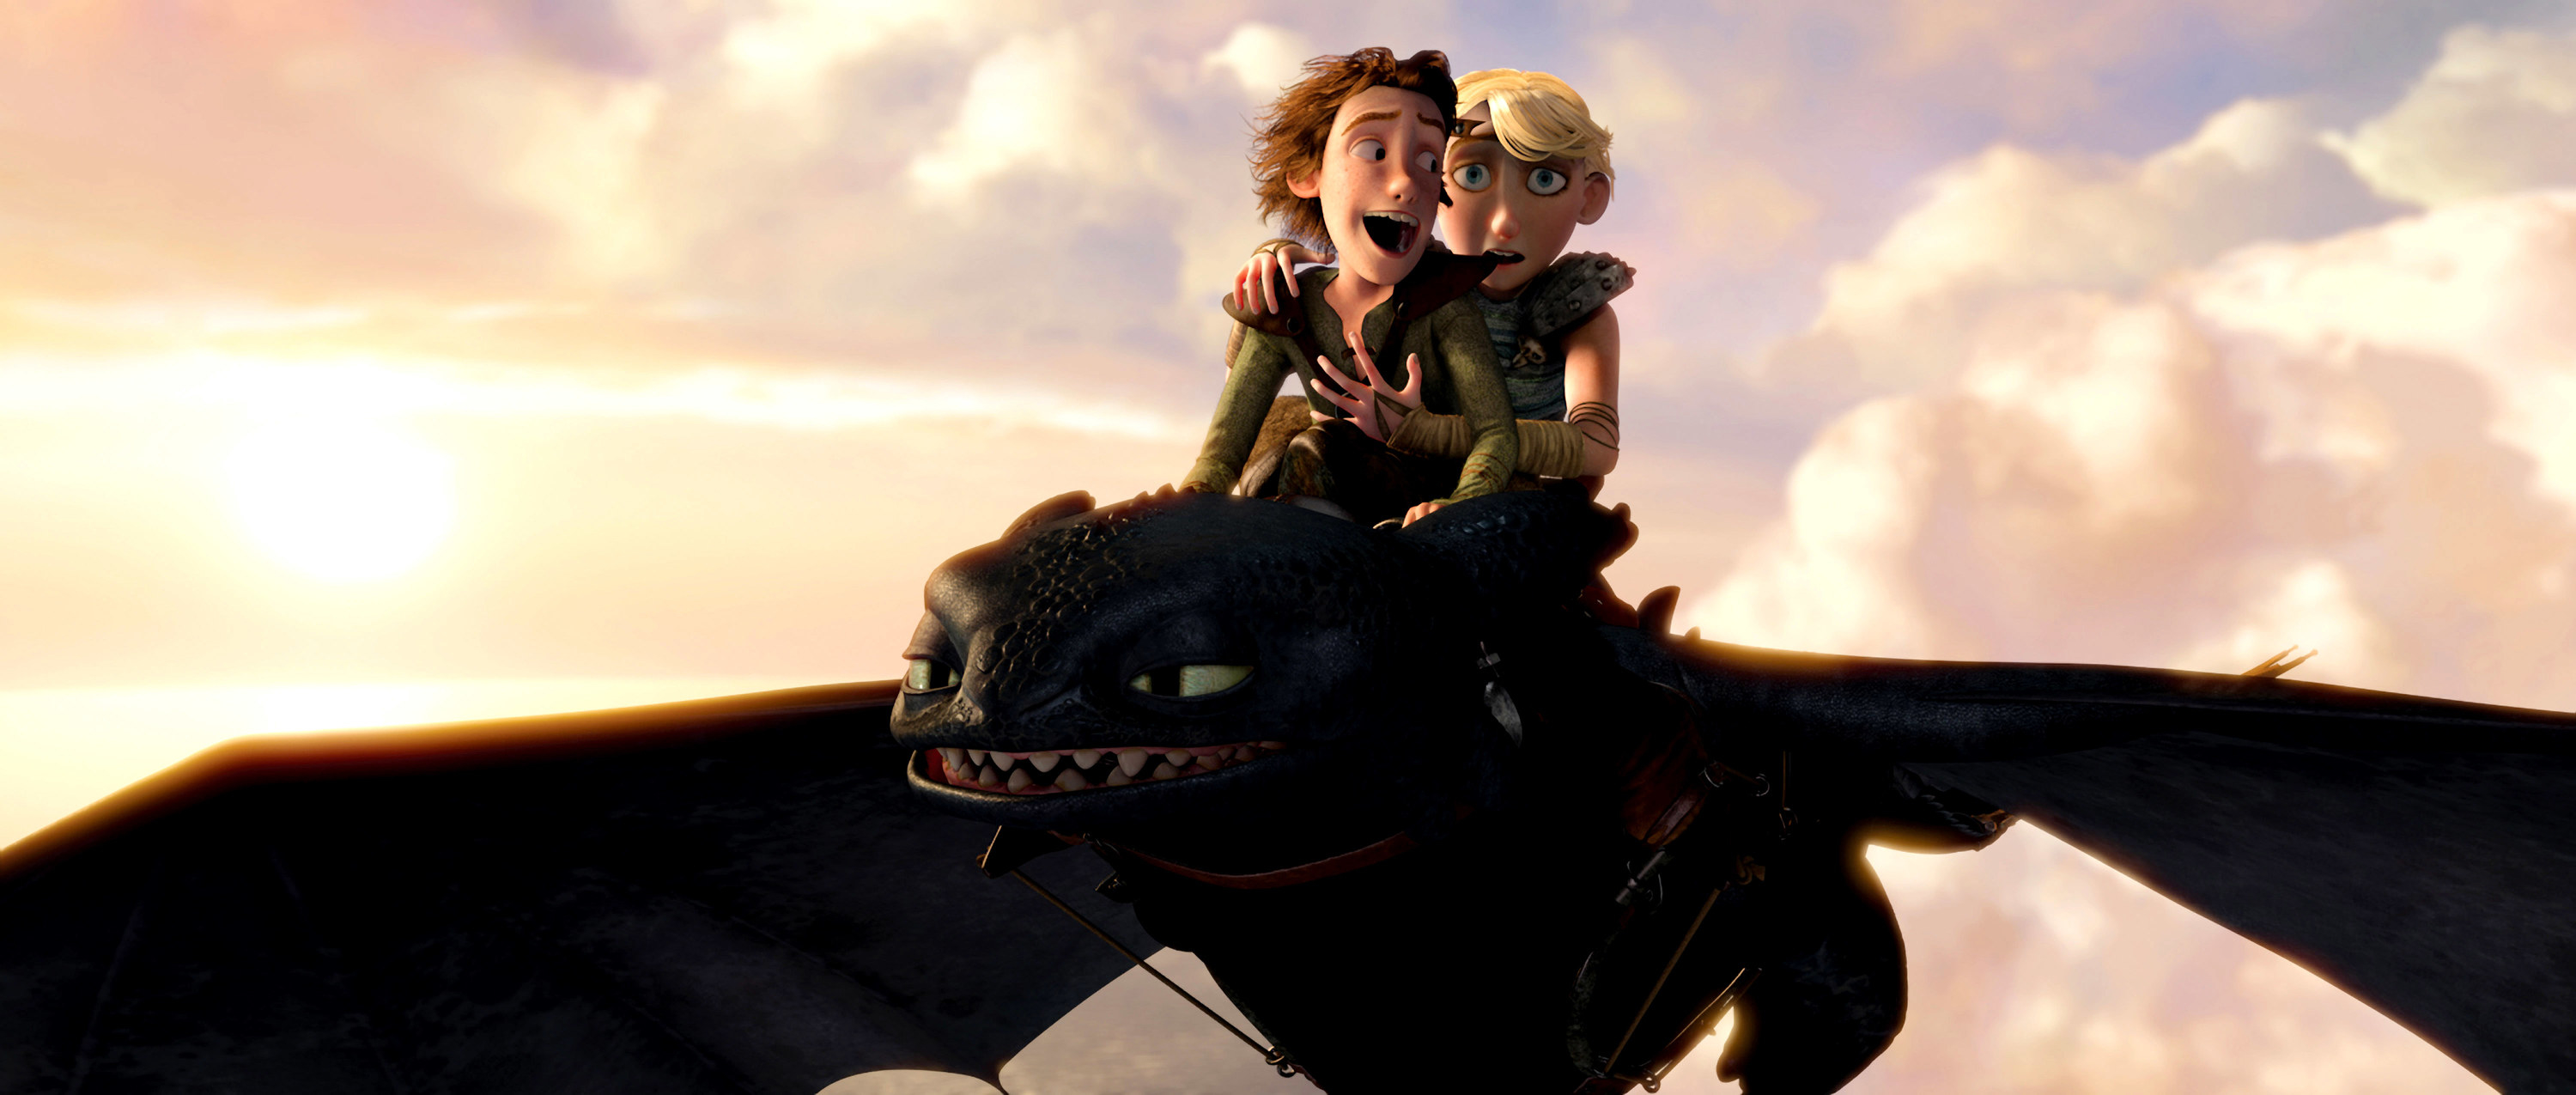 Two teens ride on a dragon